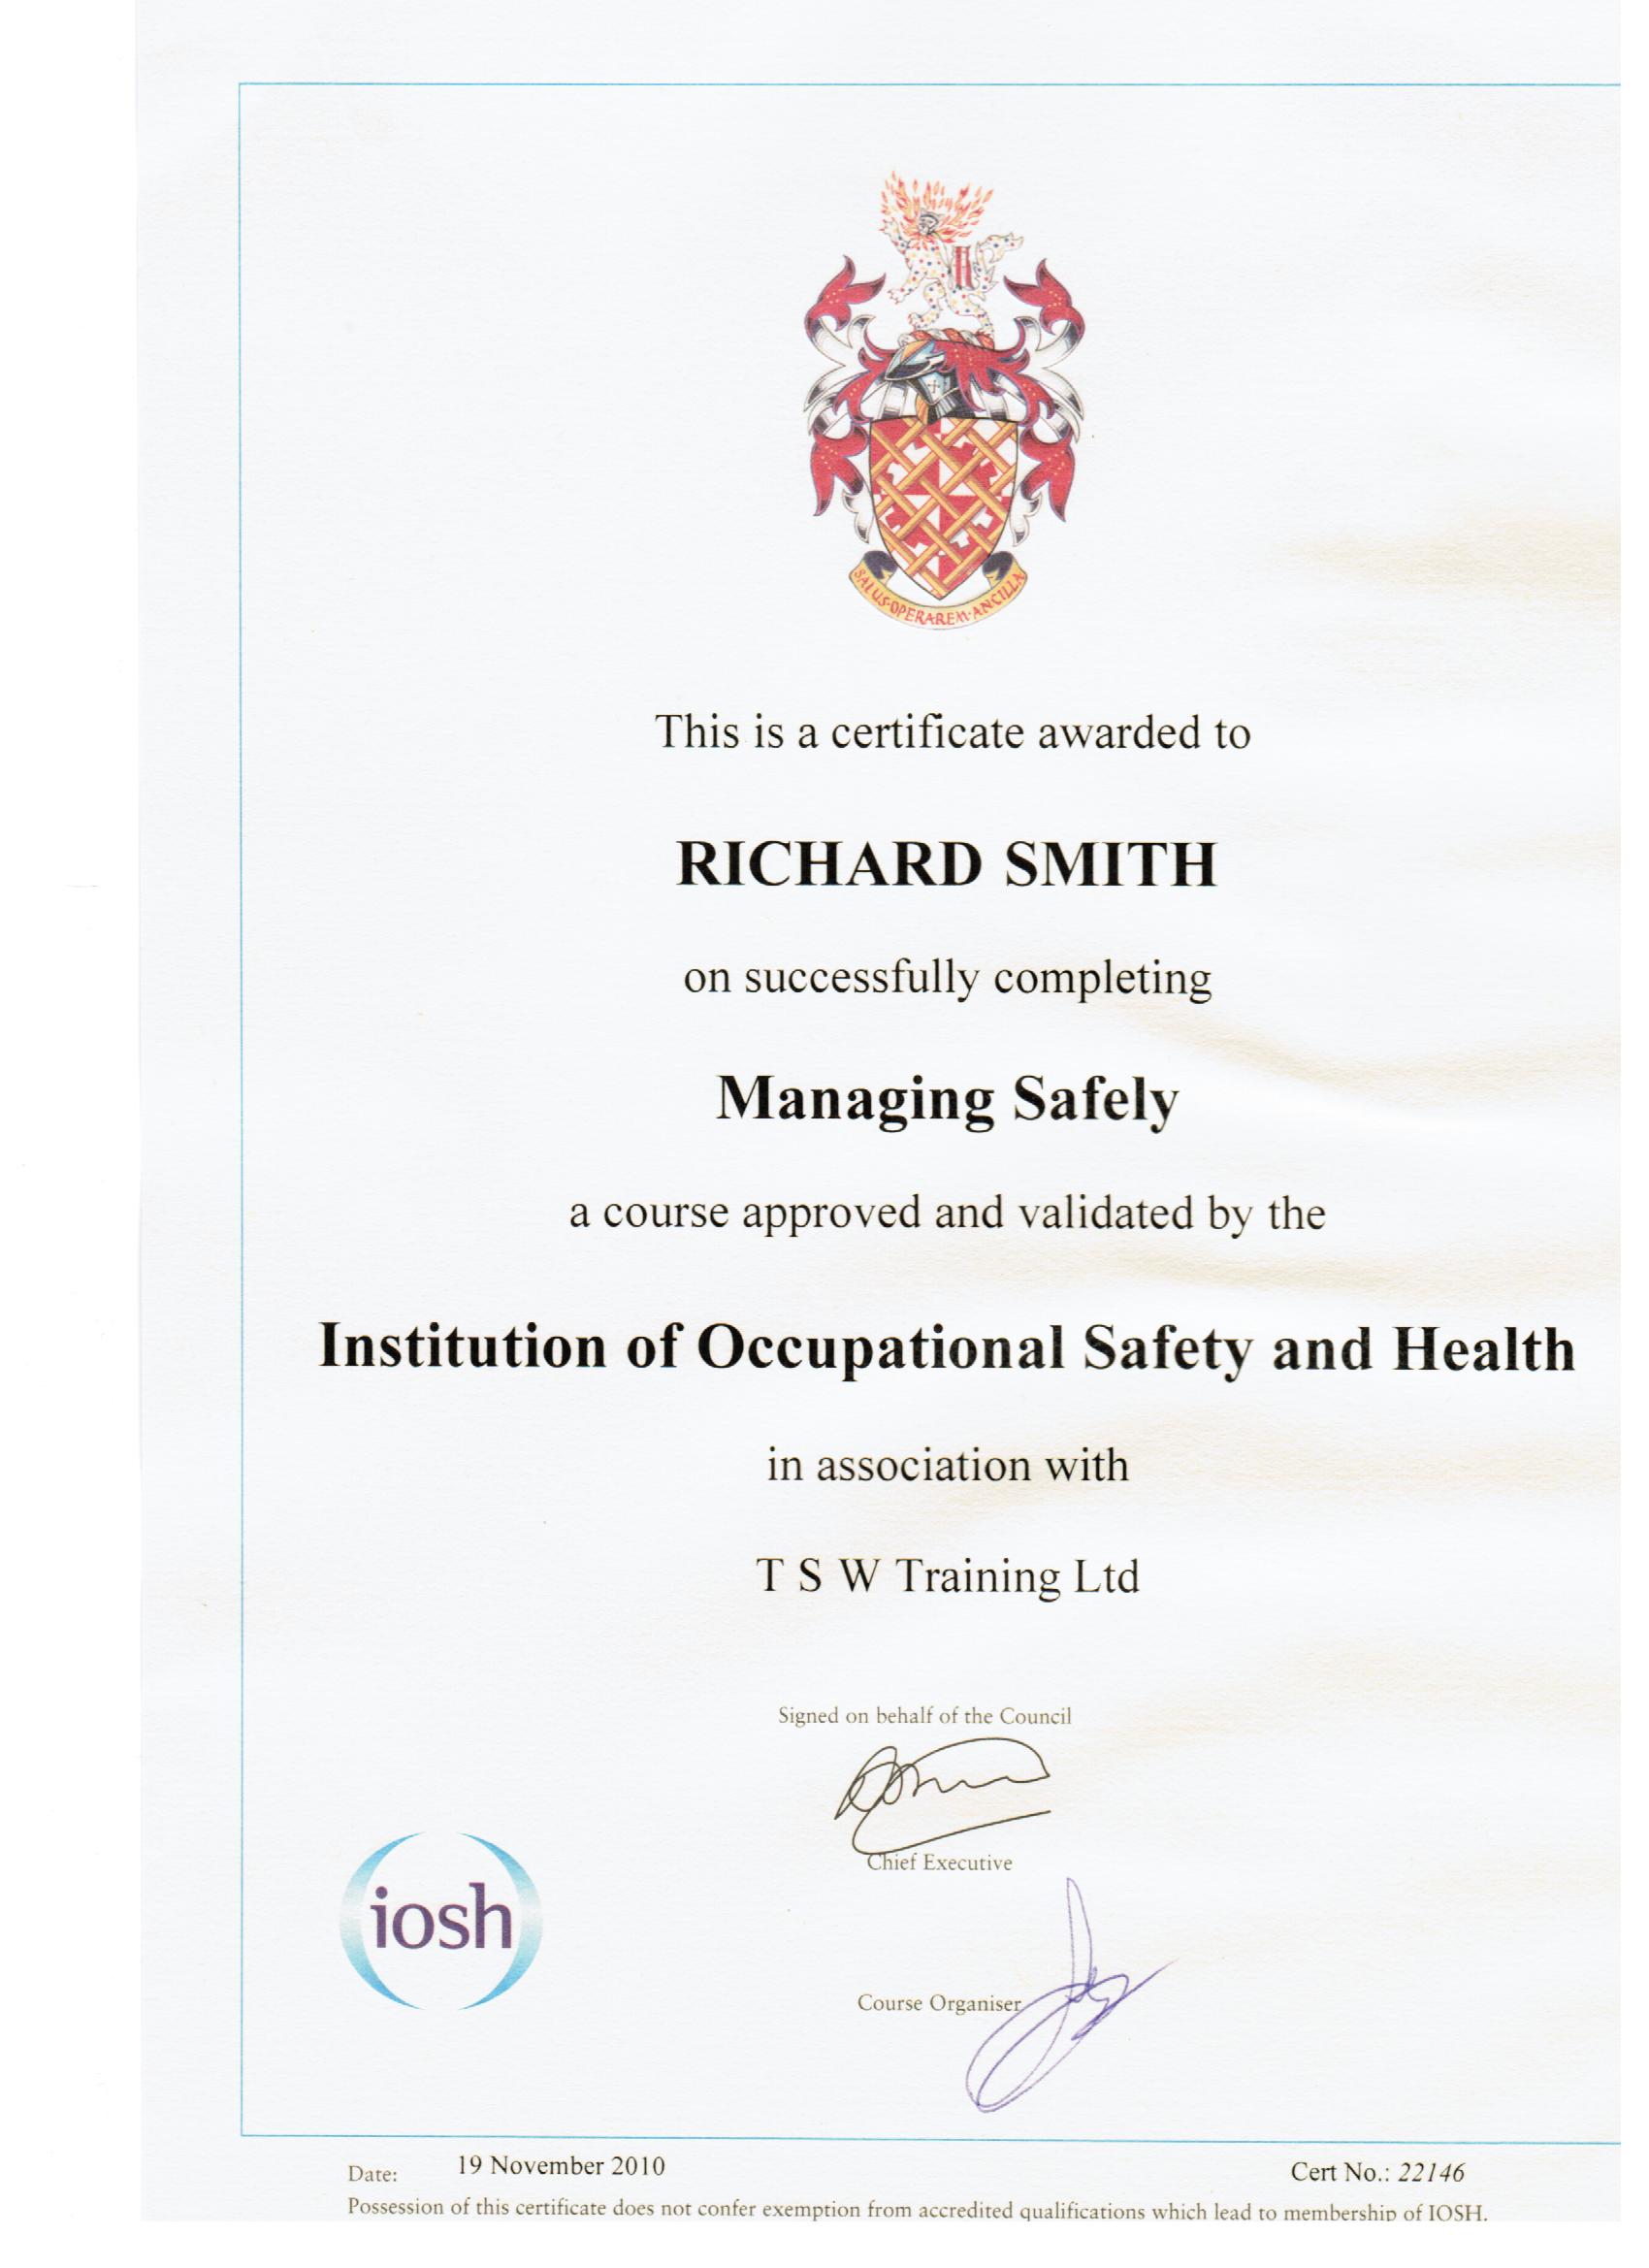 Richard Smith IOSH Managing Safely certificate